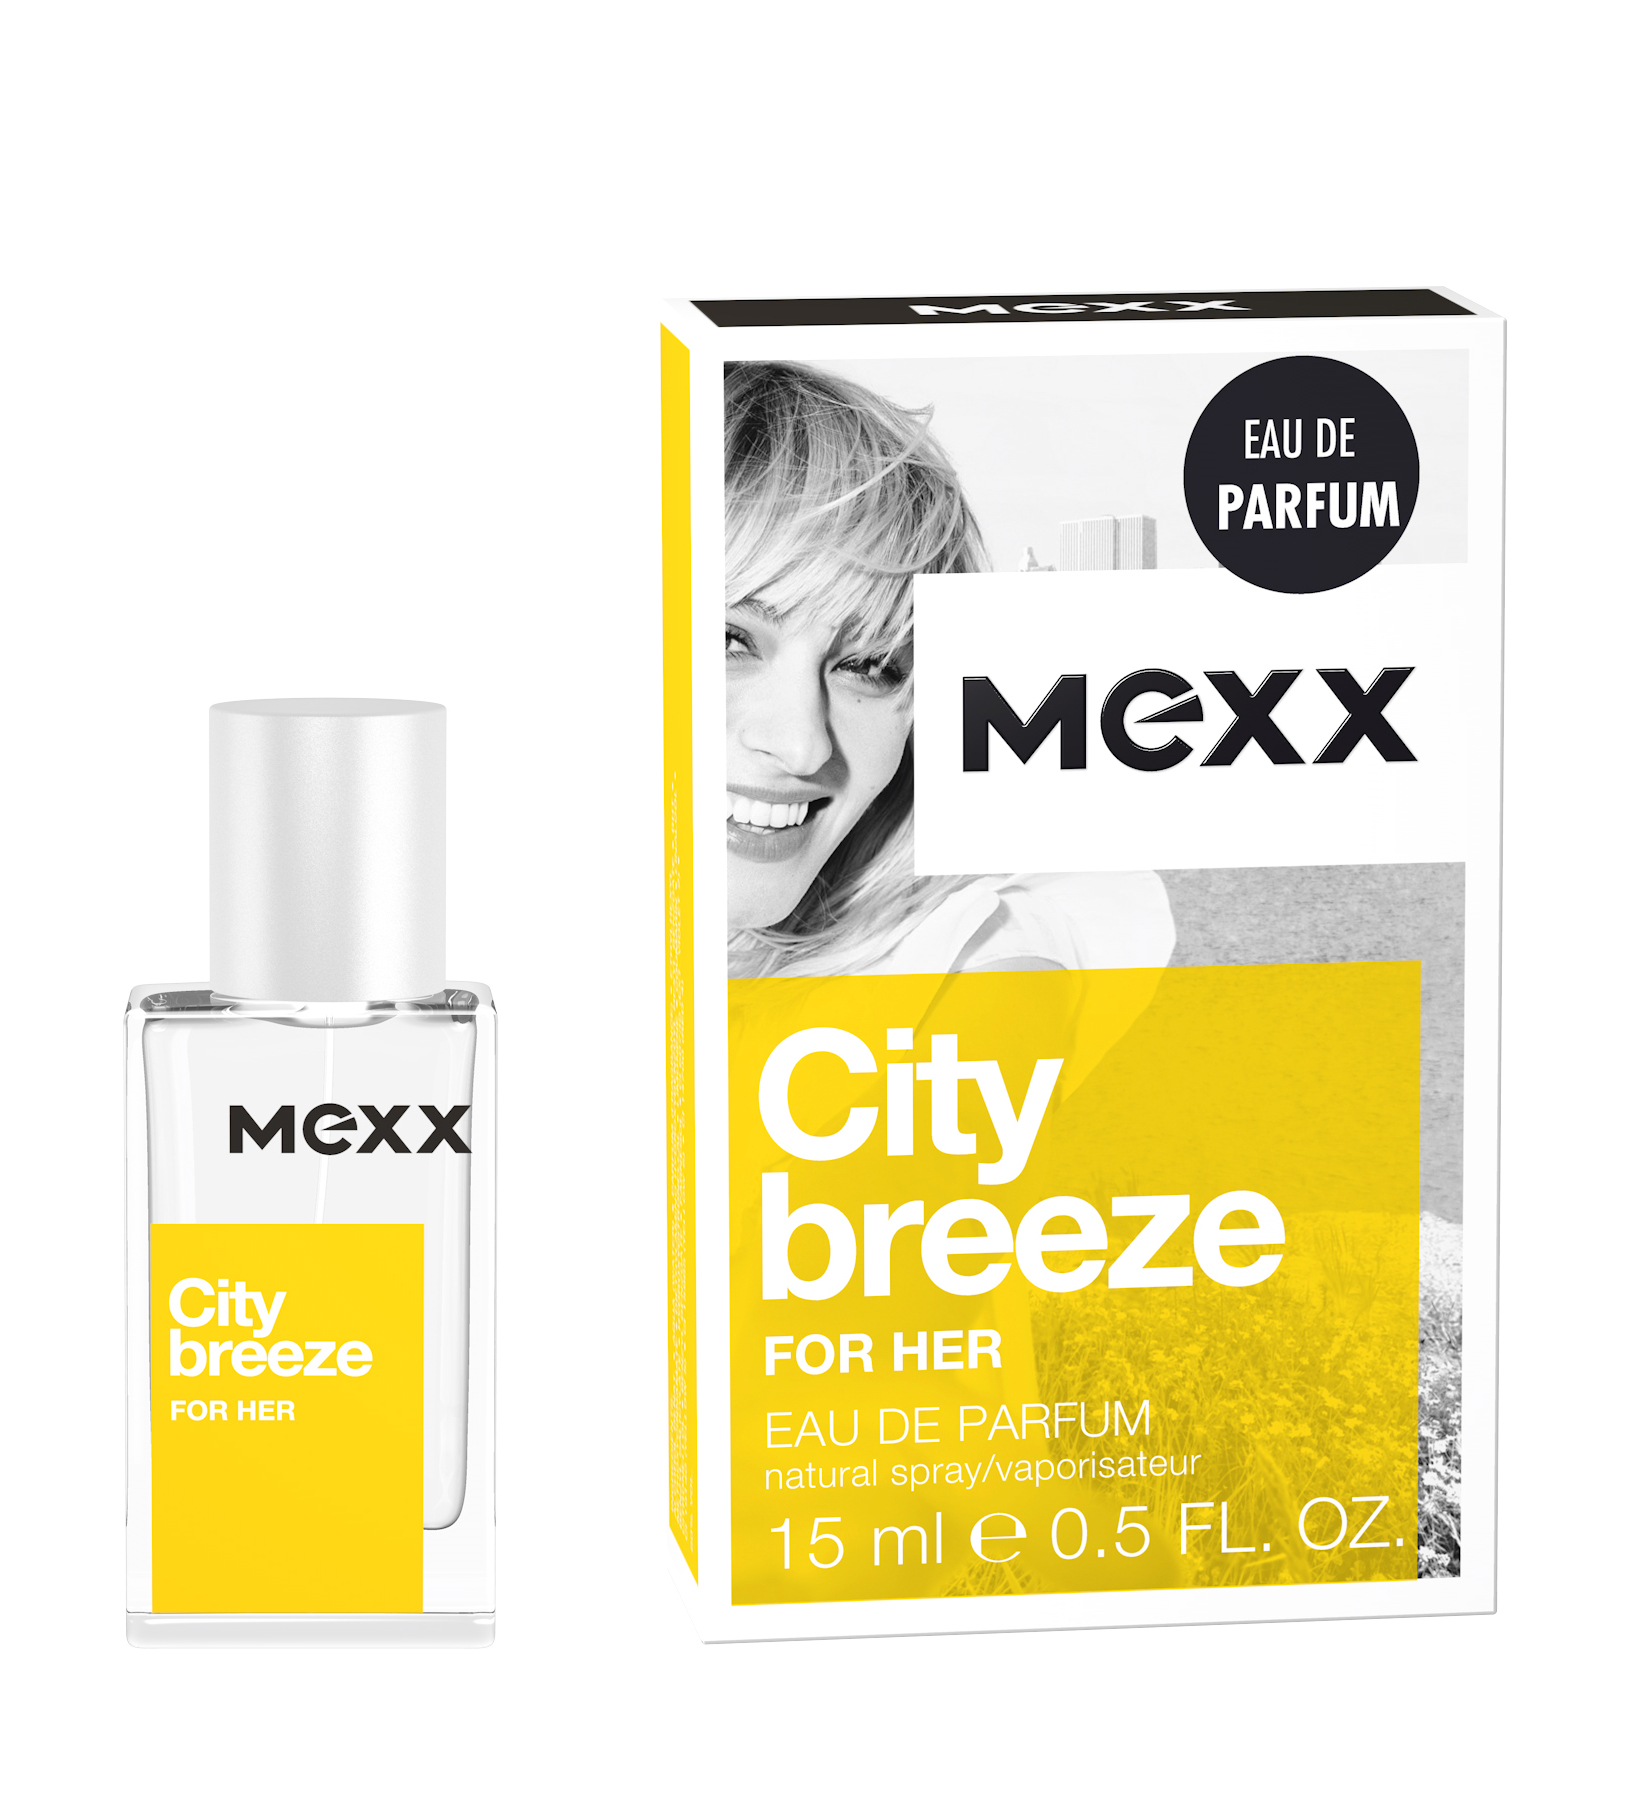 mexx-city-breeze-for-her-mexx-perfume-a-fragrance-for-women-2017